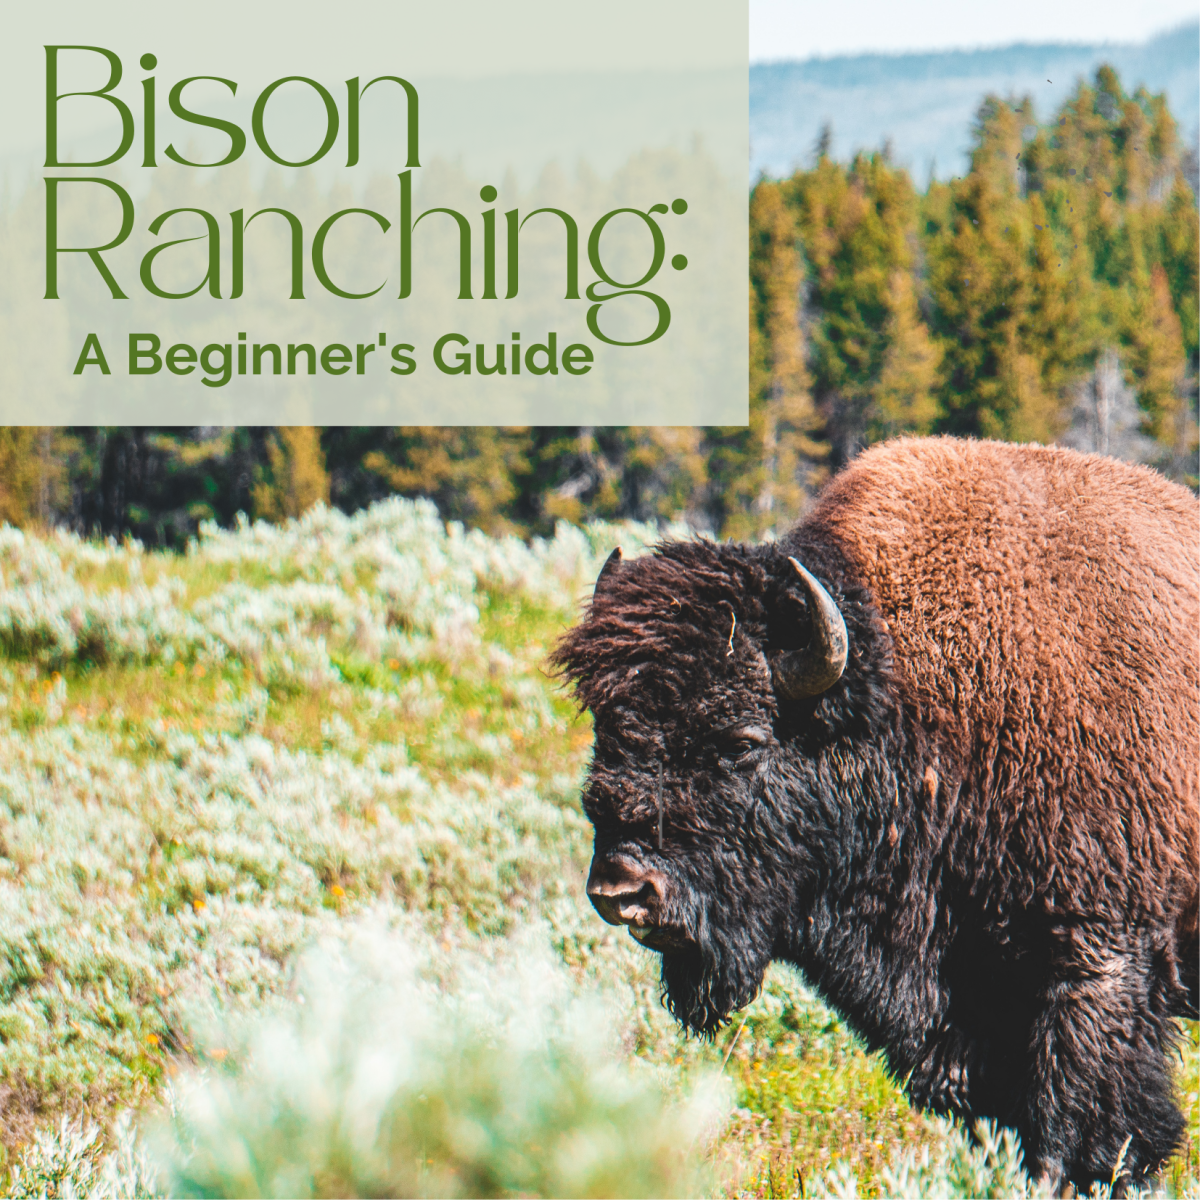 A guide to raising bison